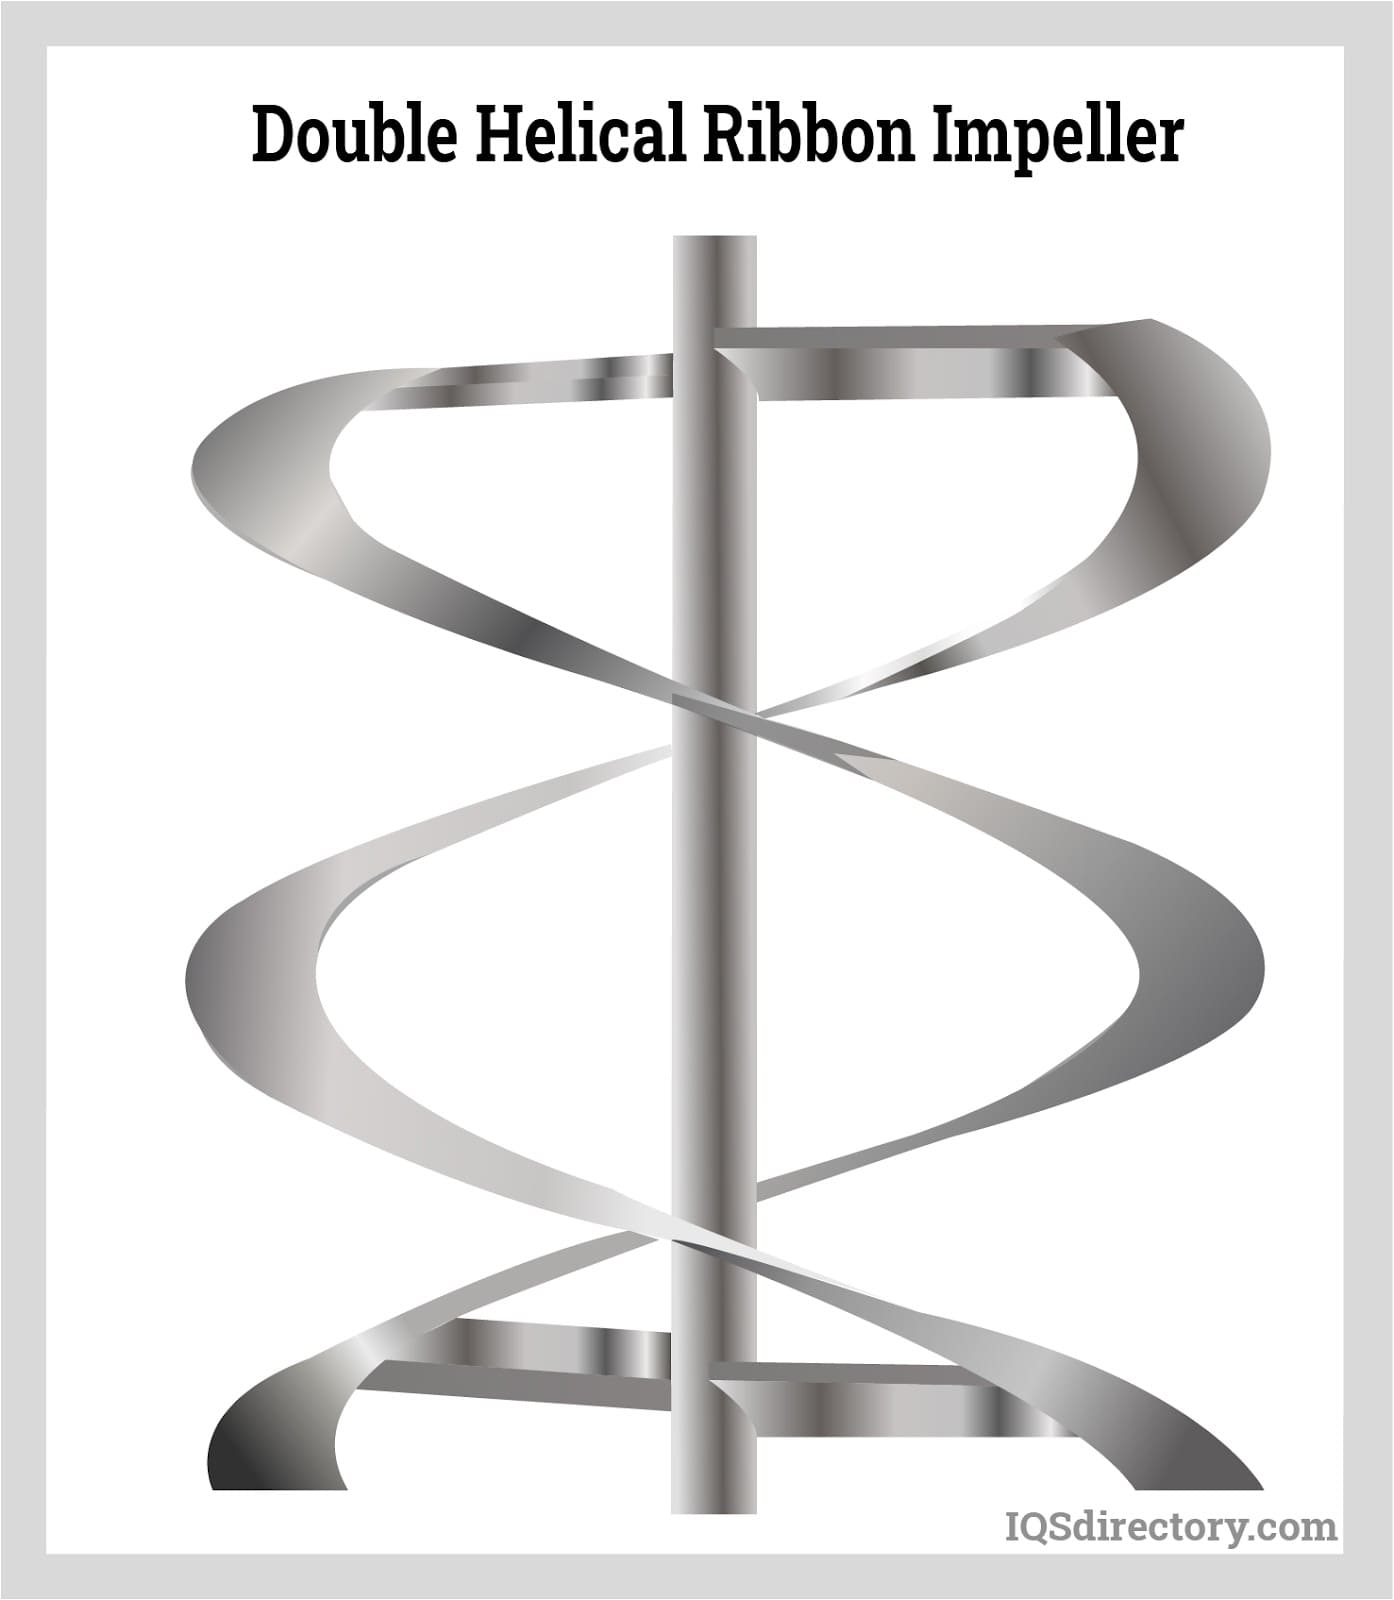 Double Helical Ribbon Impeller